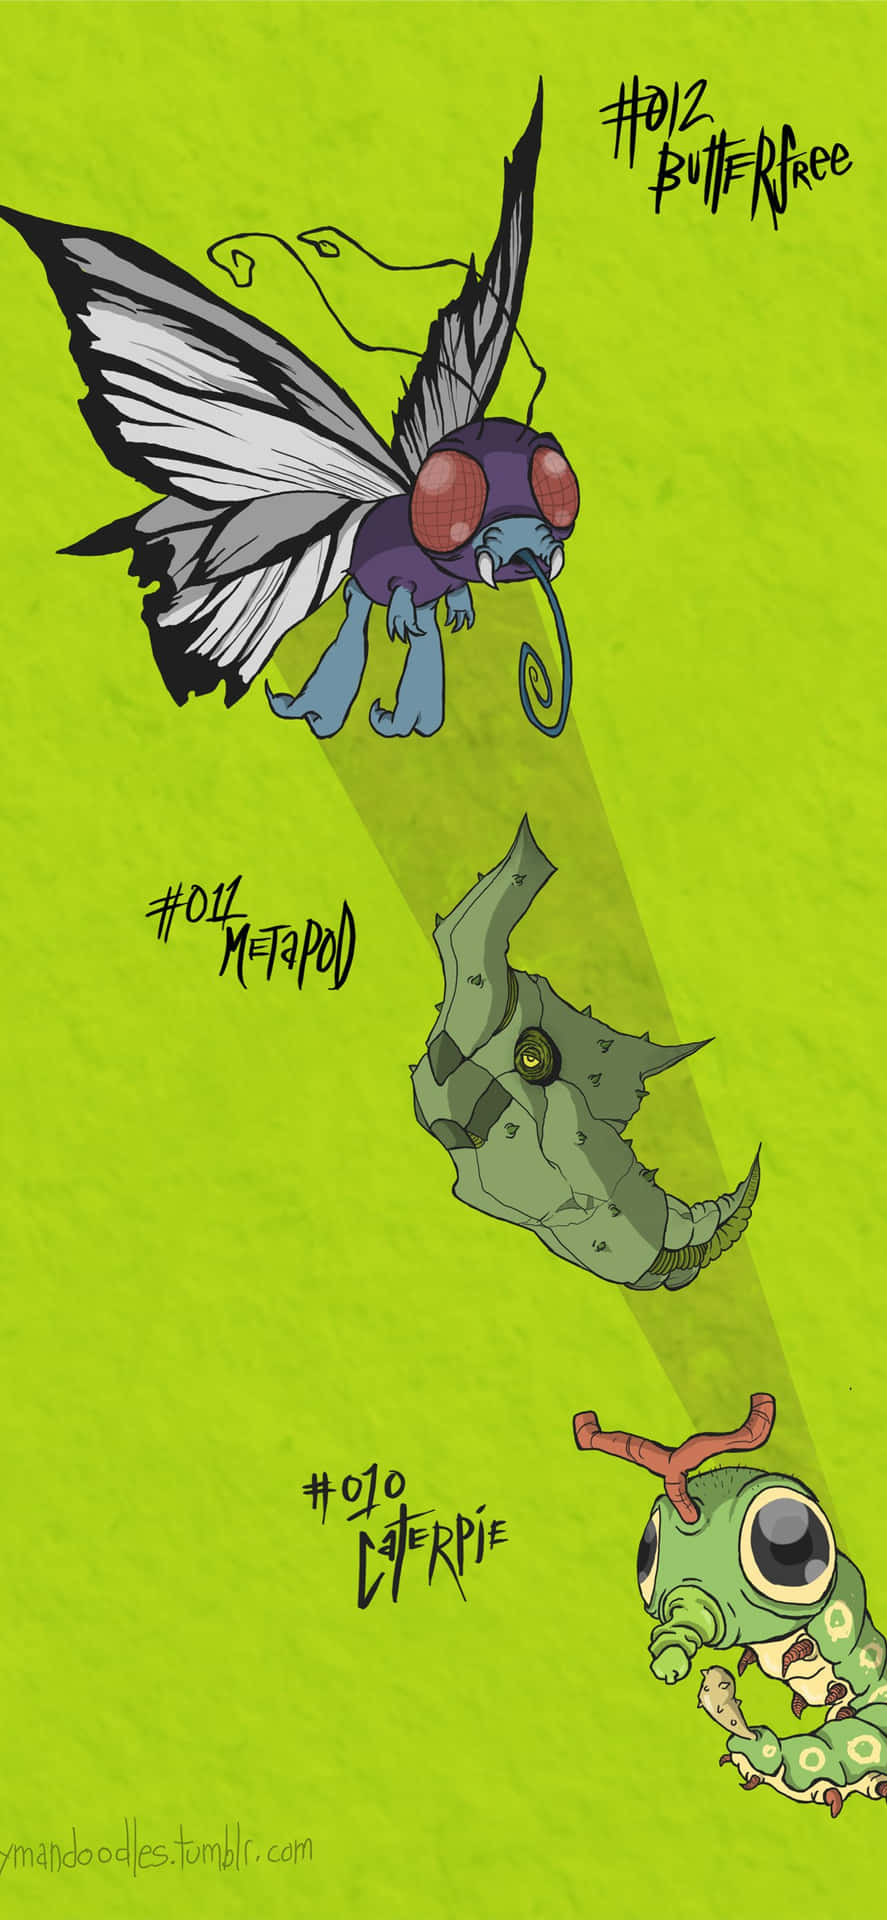 Caterpie, Metapod, And Butterfree Green Aesthetic Phone Wallpaper